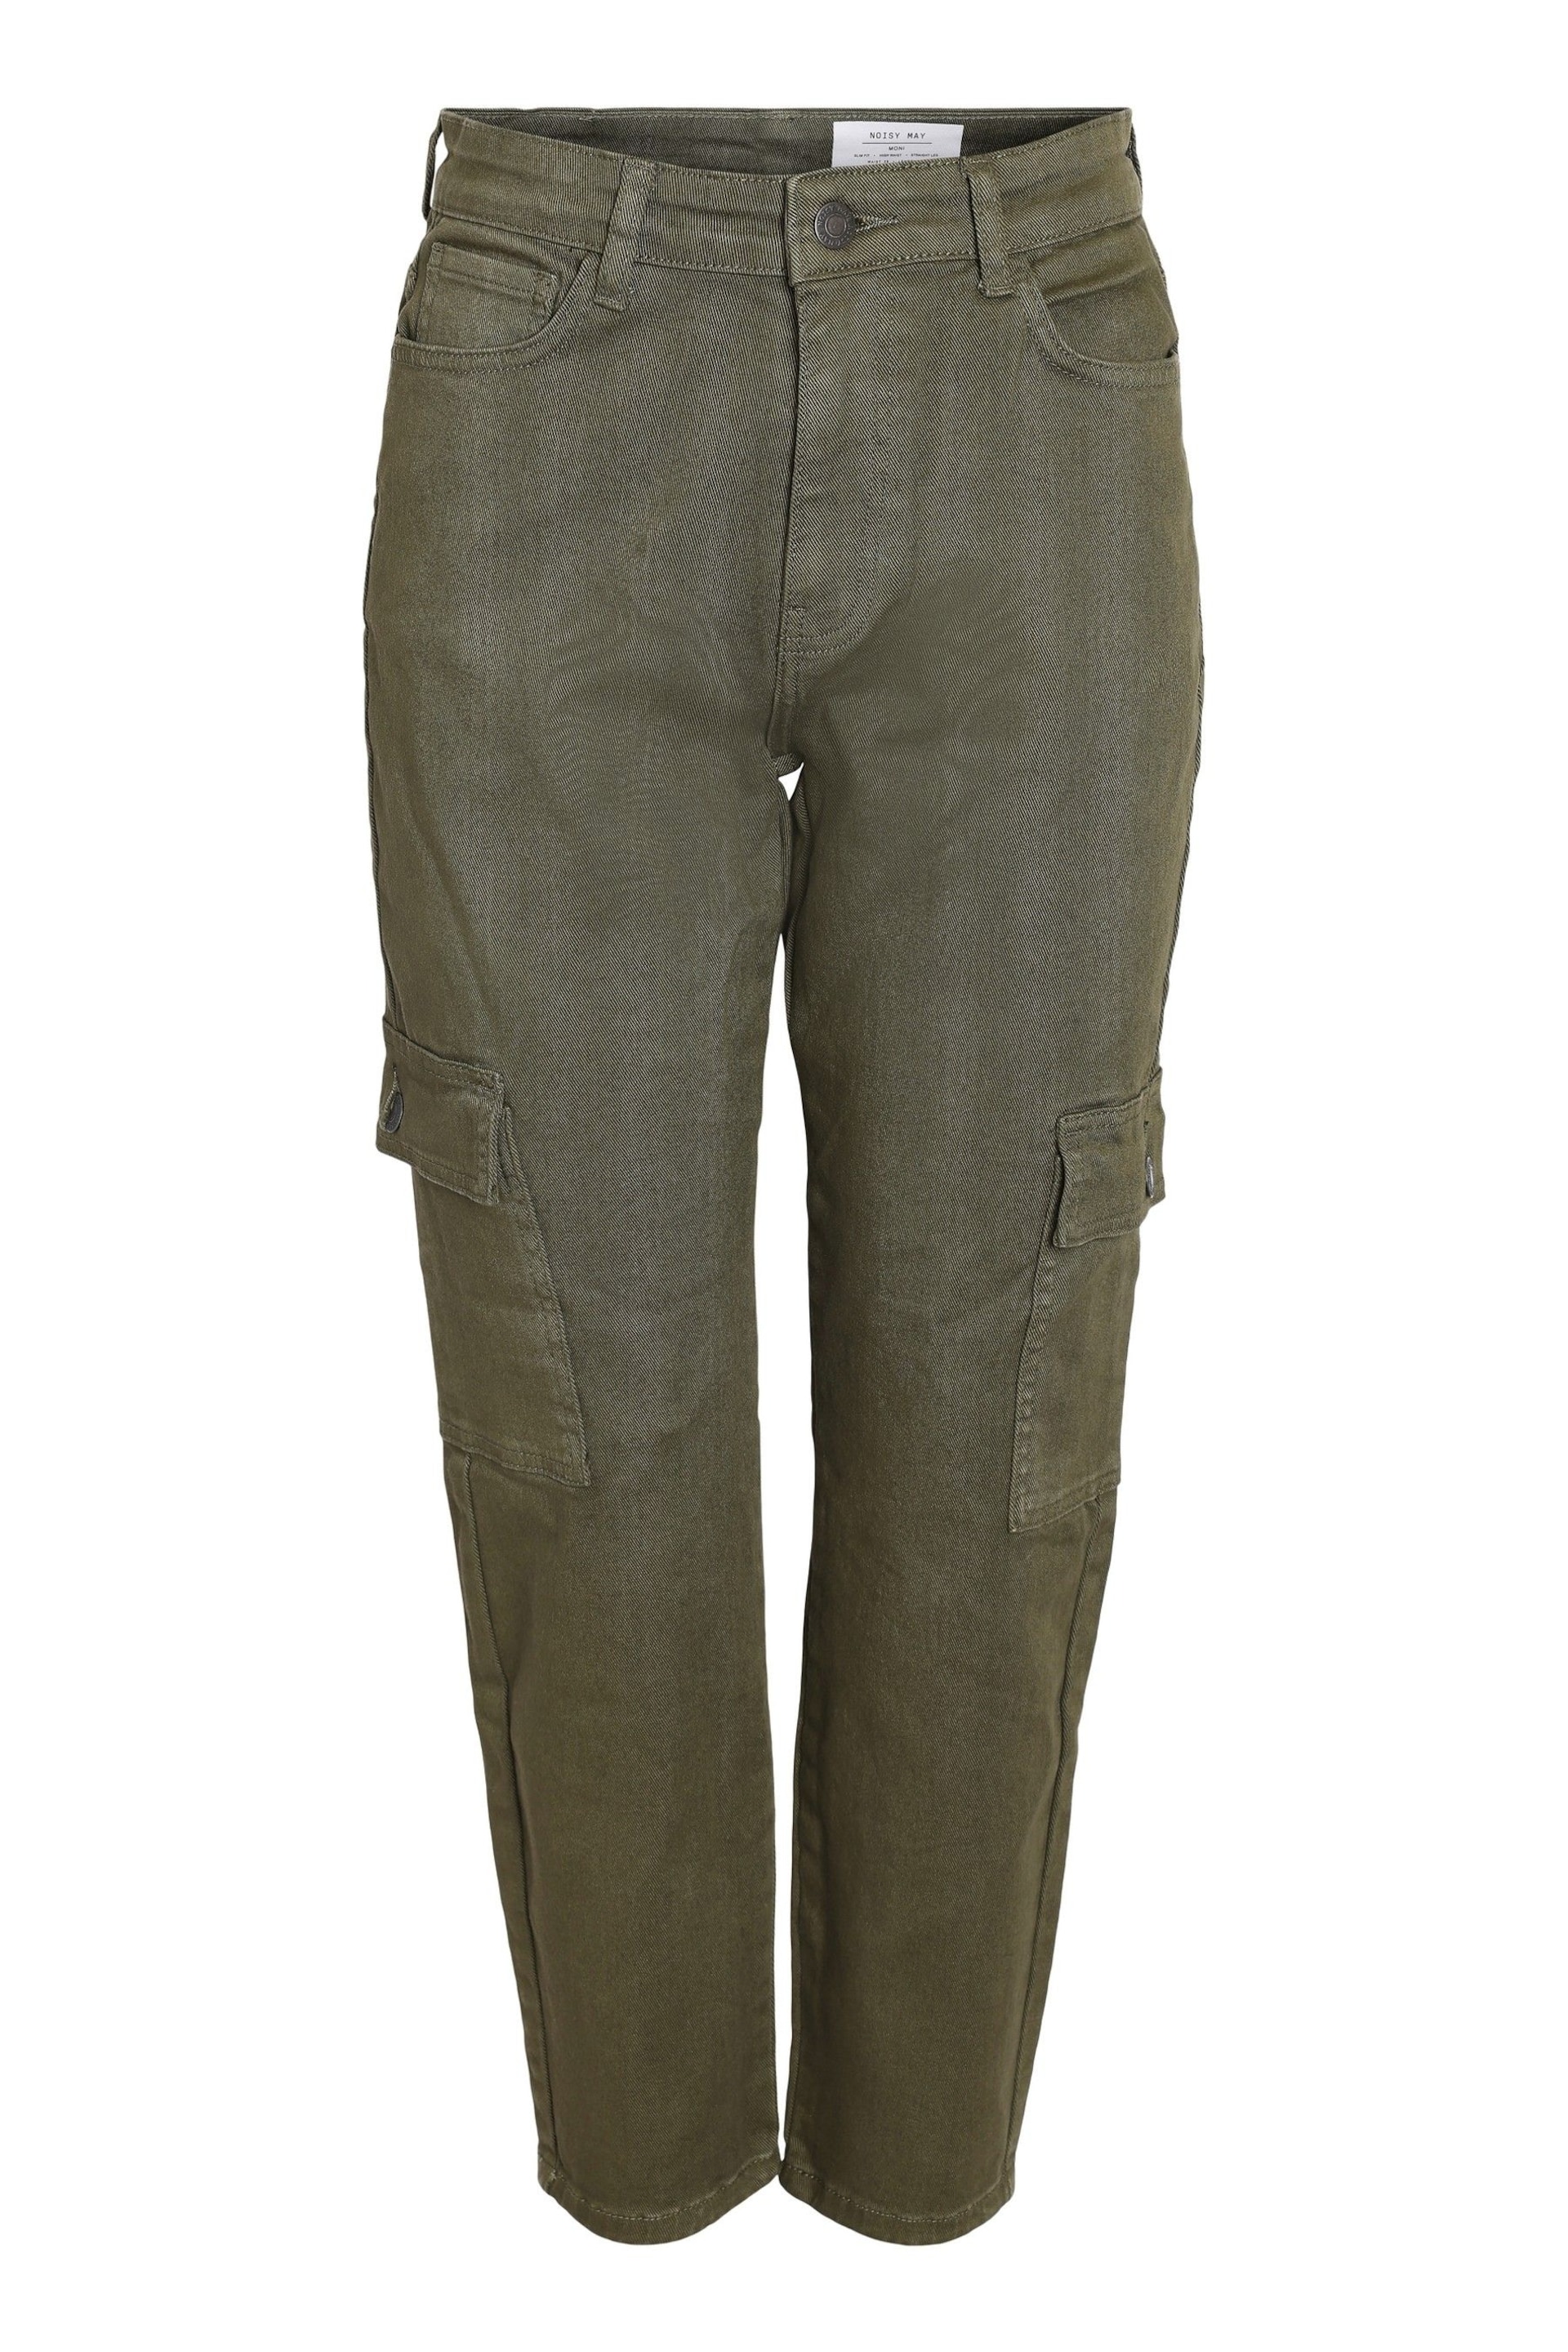 NOISY MAY Natural High Waisted Cargo Straight Leg Jeans - Image 6 of 6